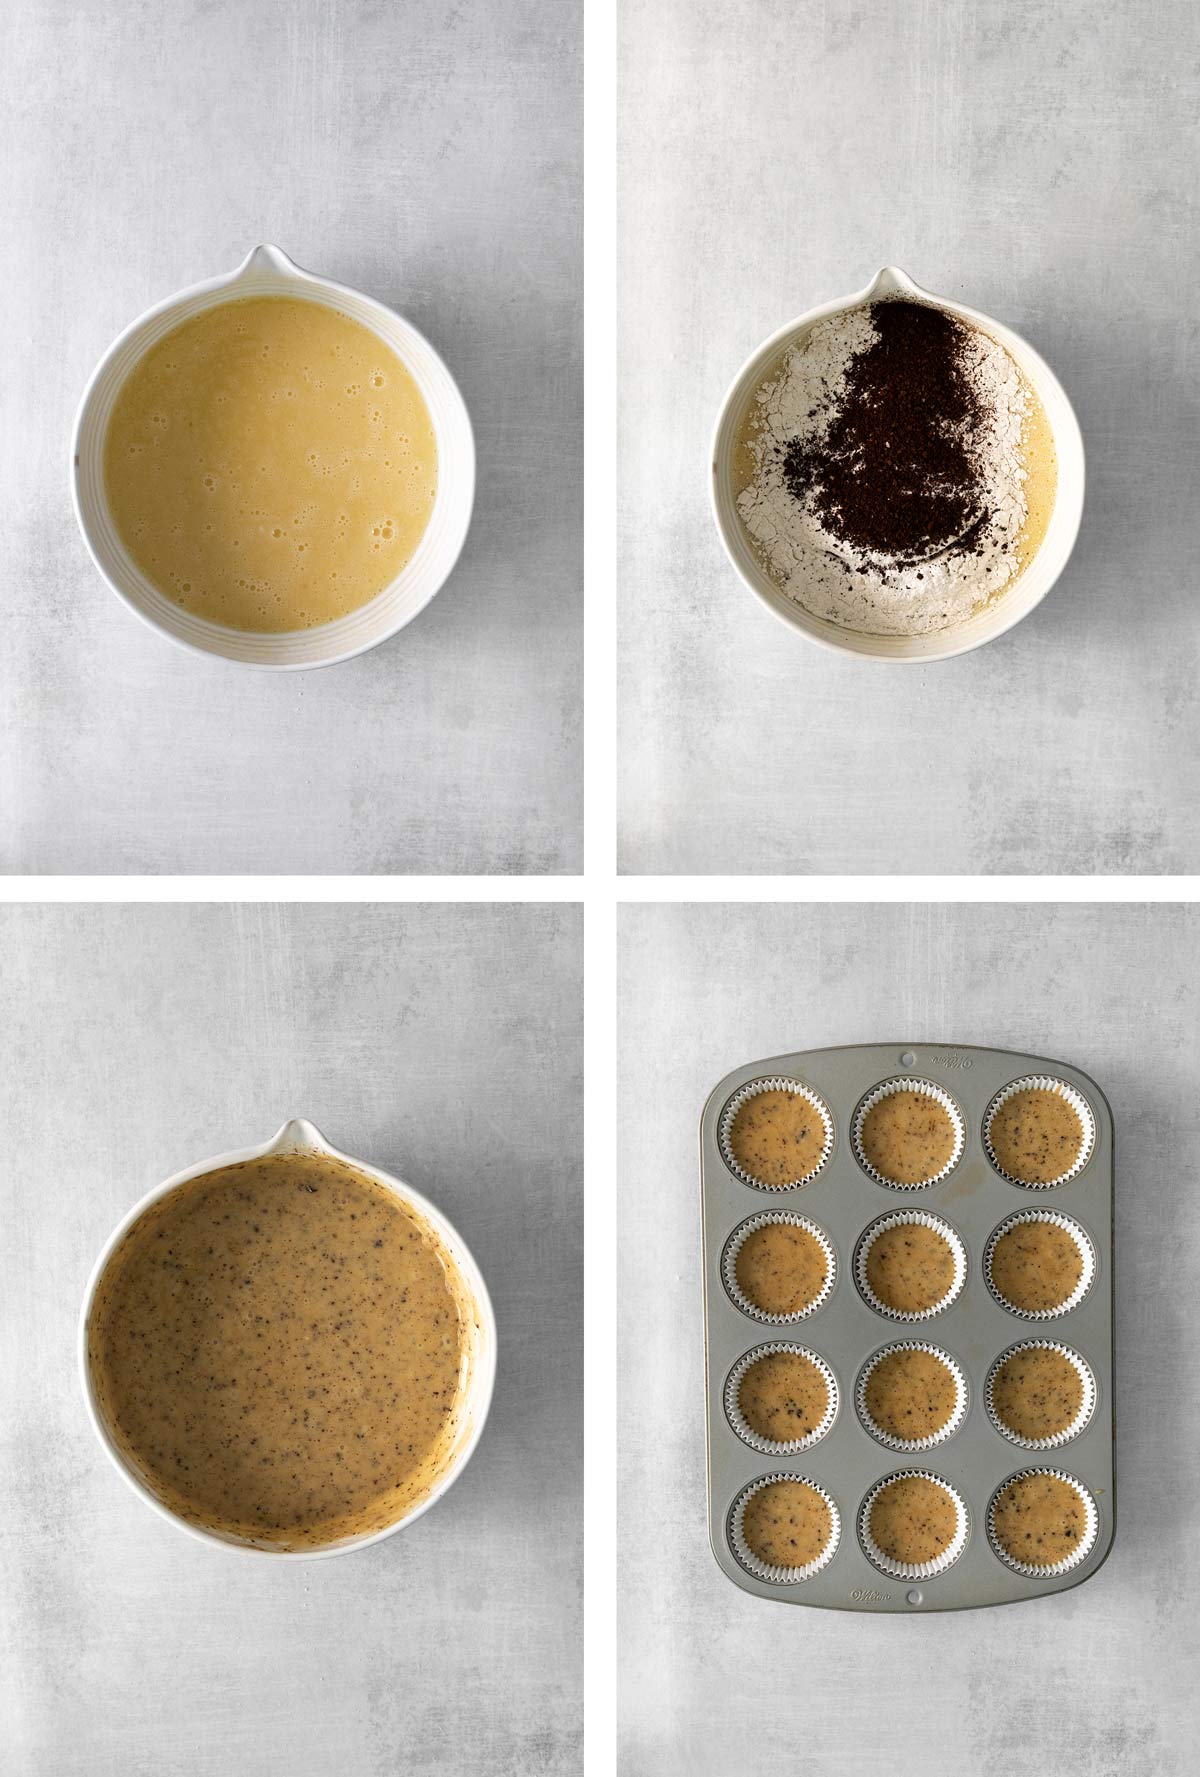 how to make the cupcake batter.